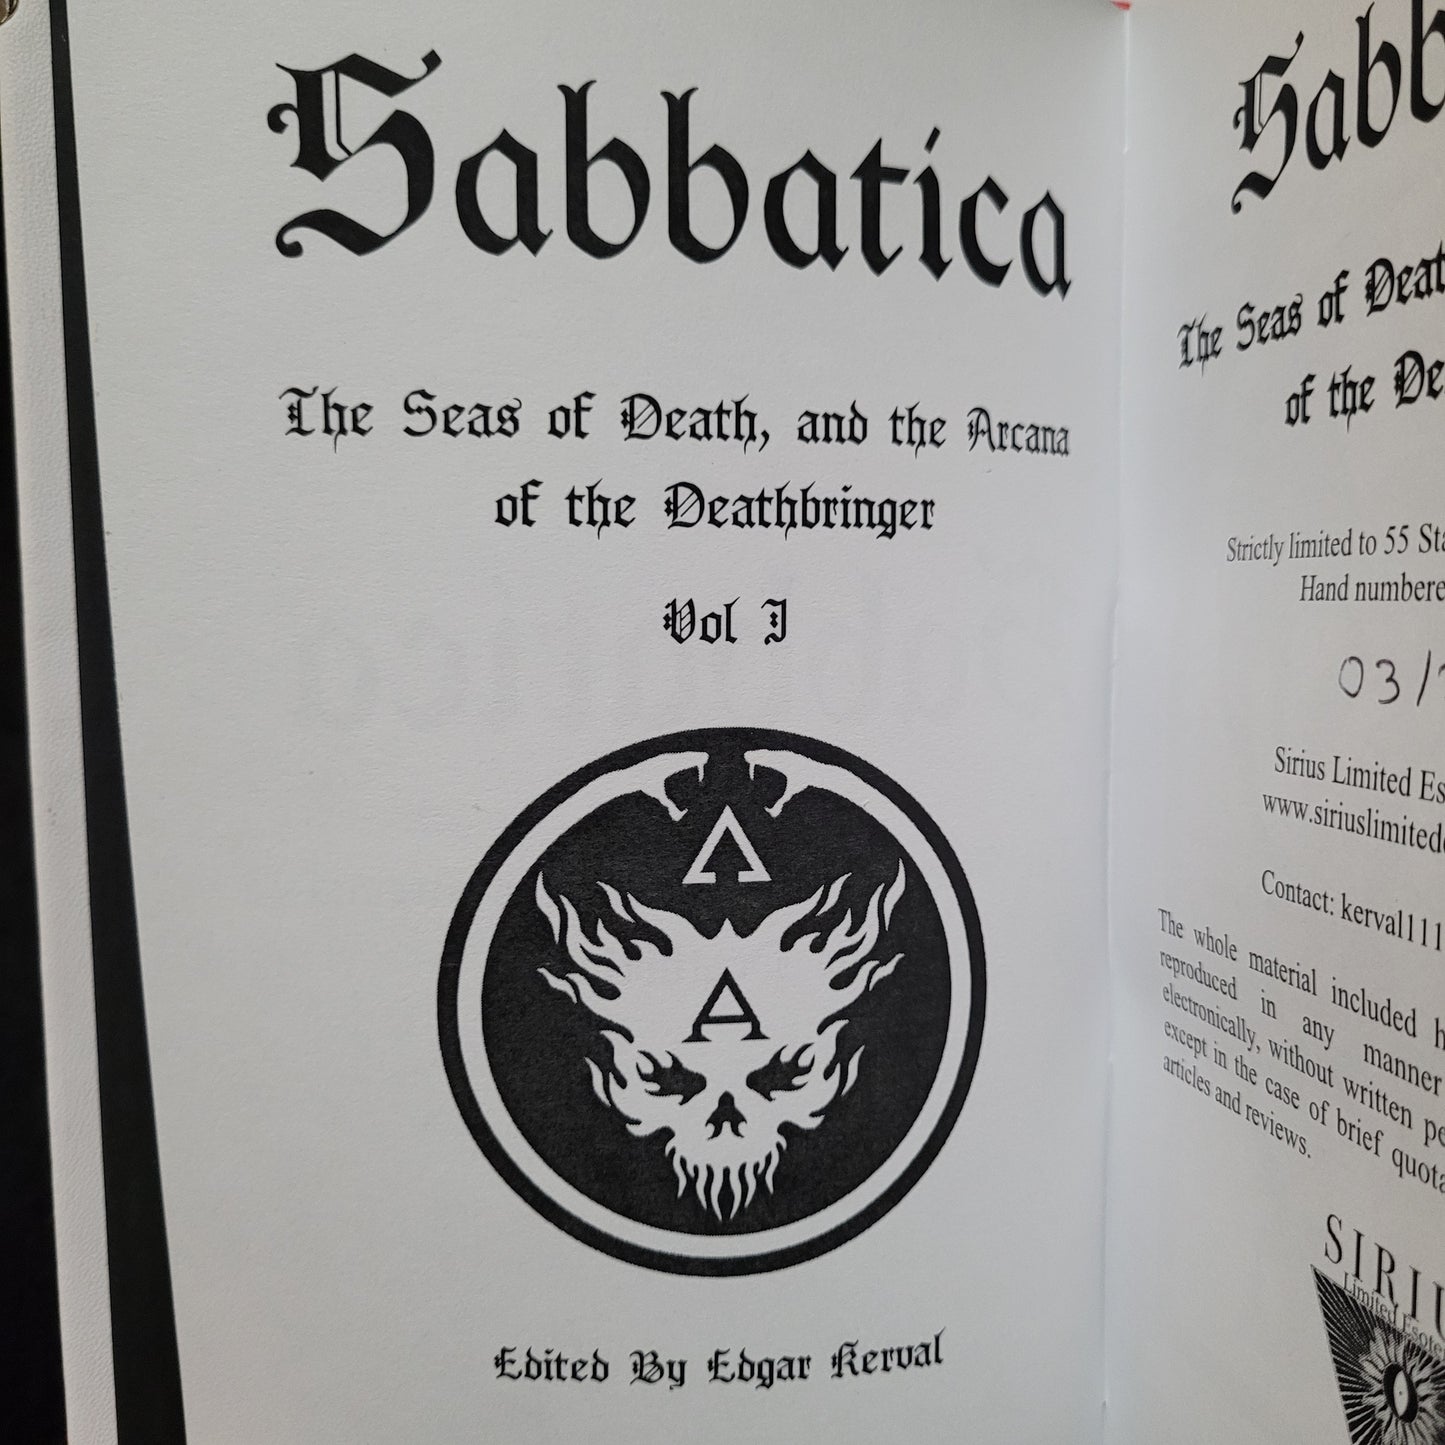 Sabbatica Volume I: The Seas of Death, and the Arcana of the Deathbringer Edited by Edgar Kerval (Sirius  Limited Esoterica, 2022) Deluxe Edition Limited to 22 Copies